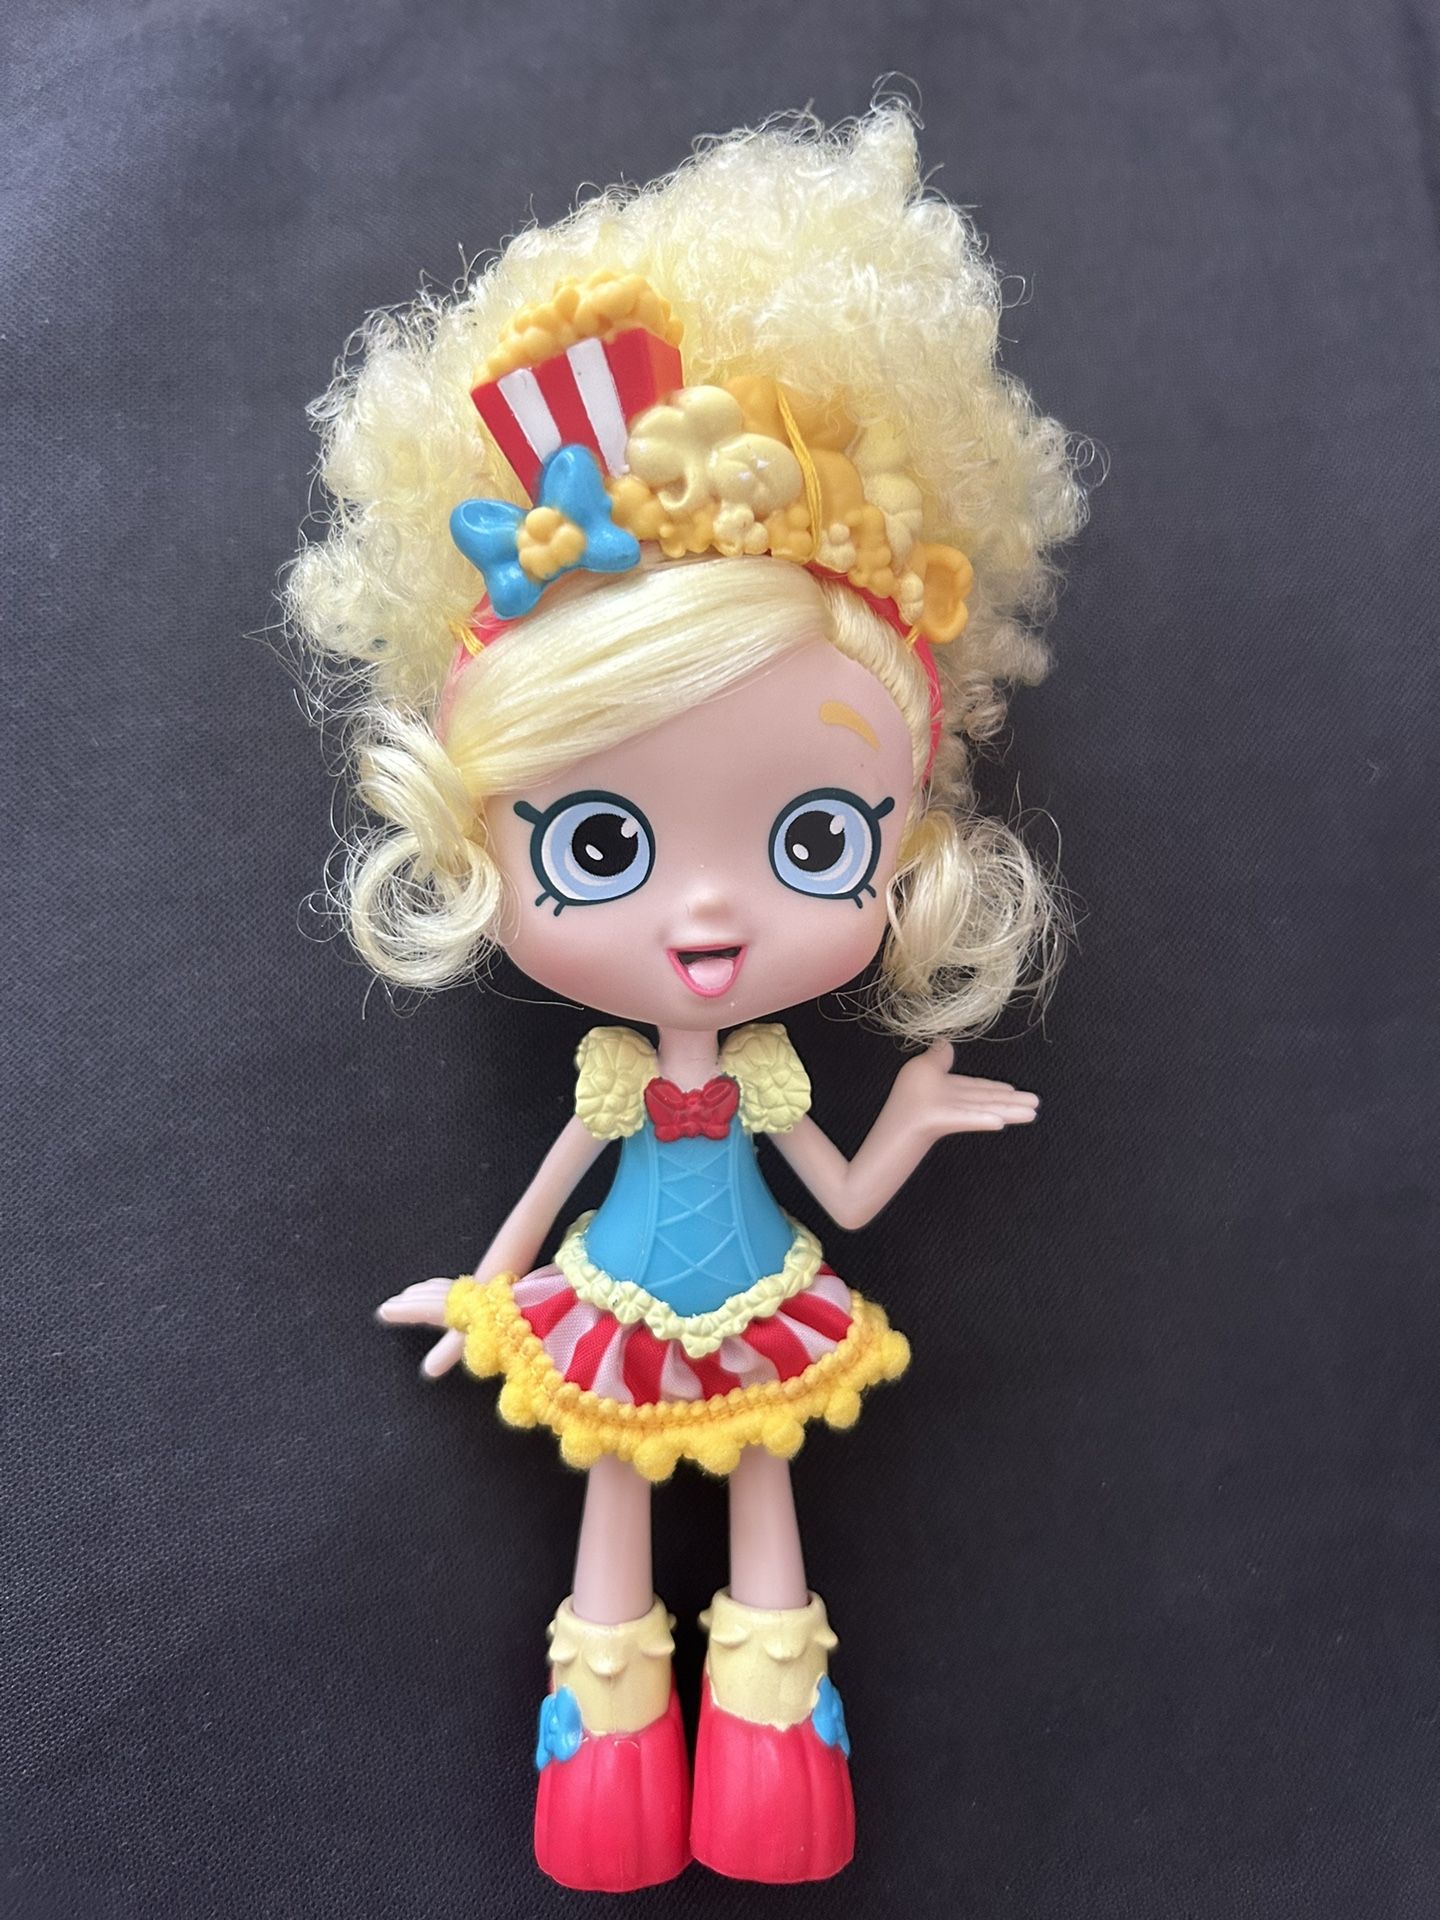 Shopkins Shoppies Poppette Doll With Exclusive Shopkins Awesome Hair new